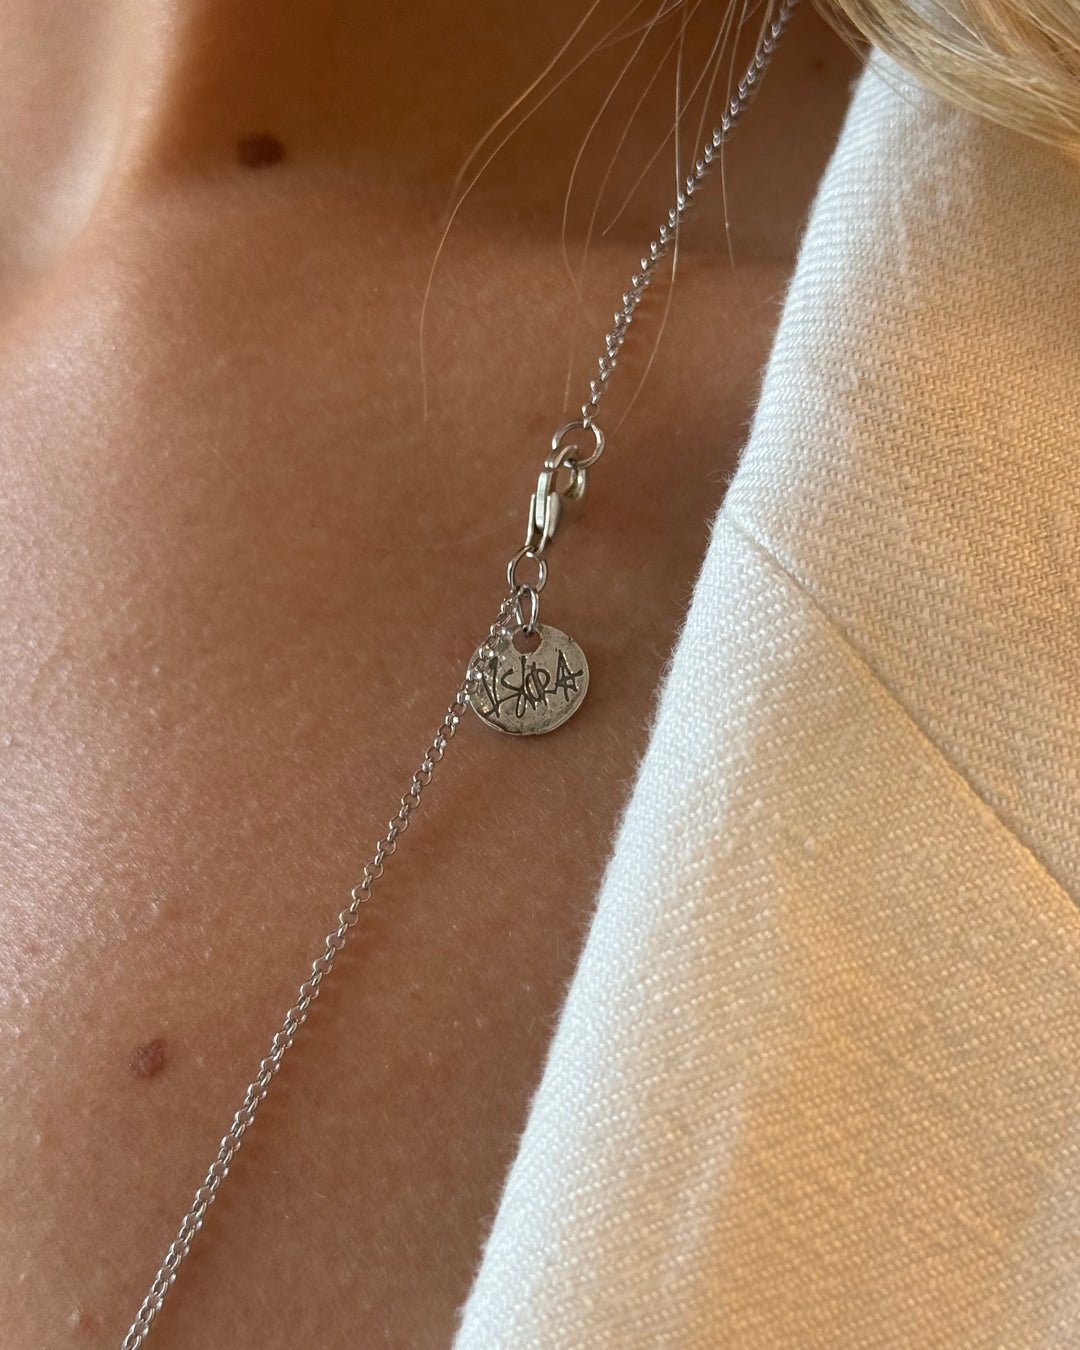 Free Hearts Necklace